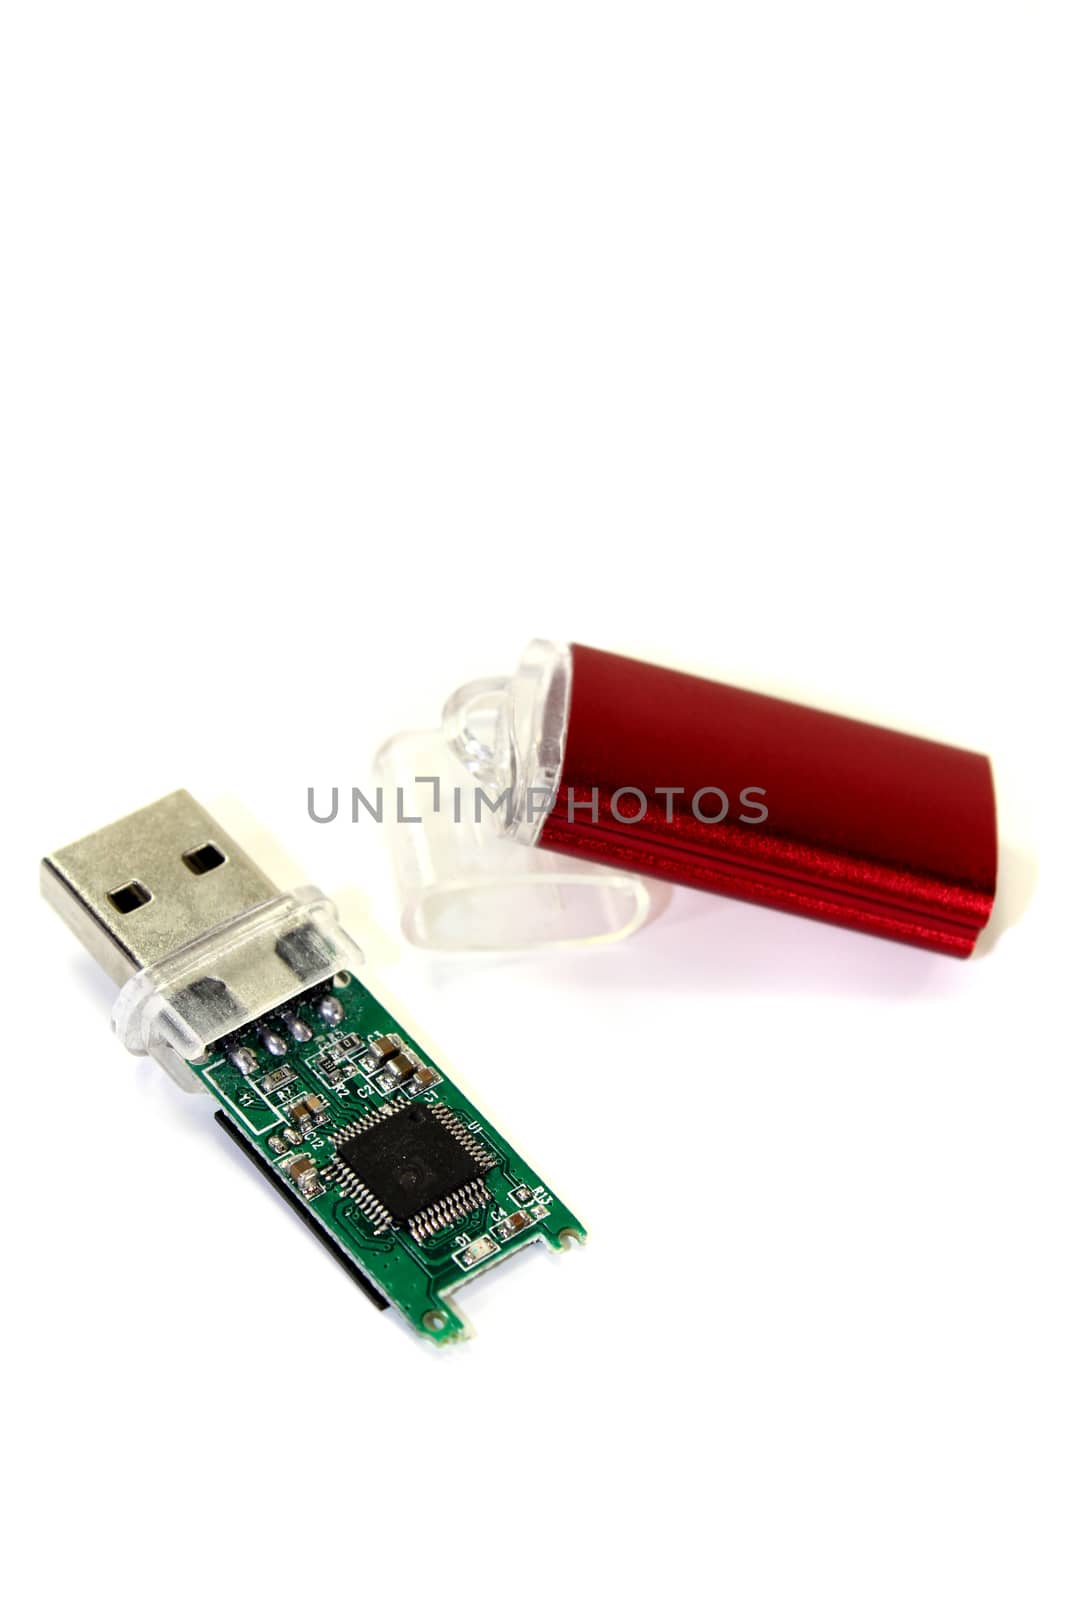 disassembled little red USB flash drive on a light background